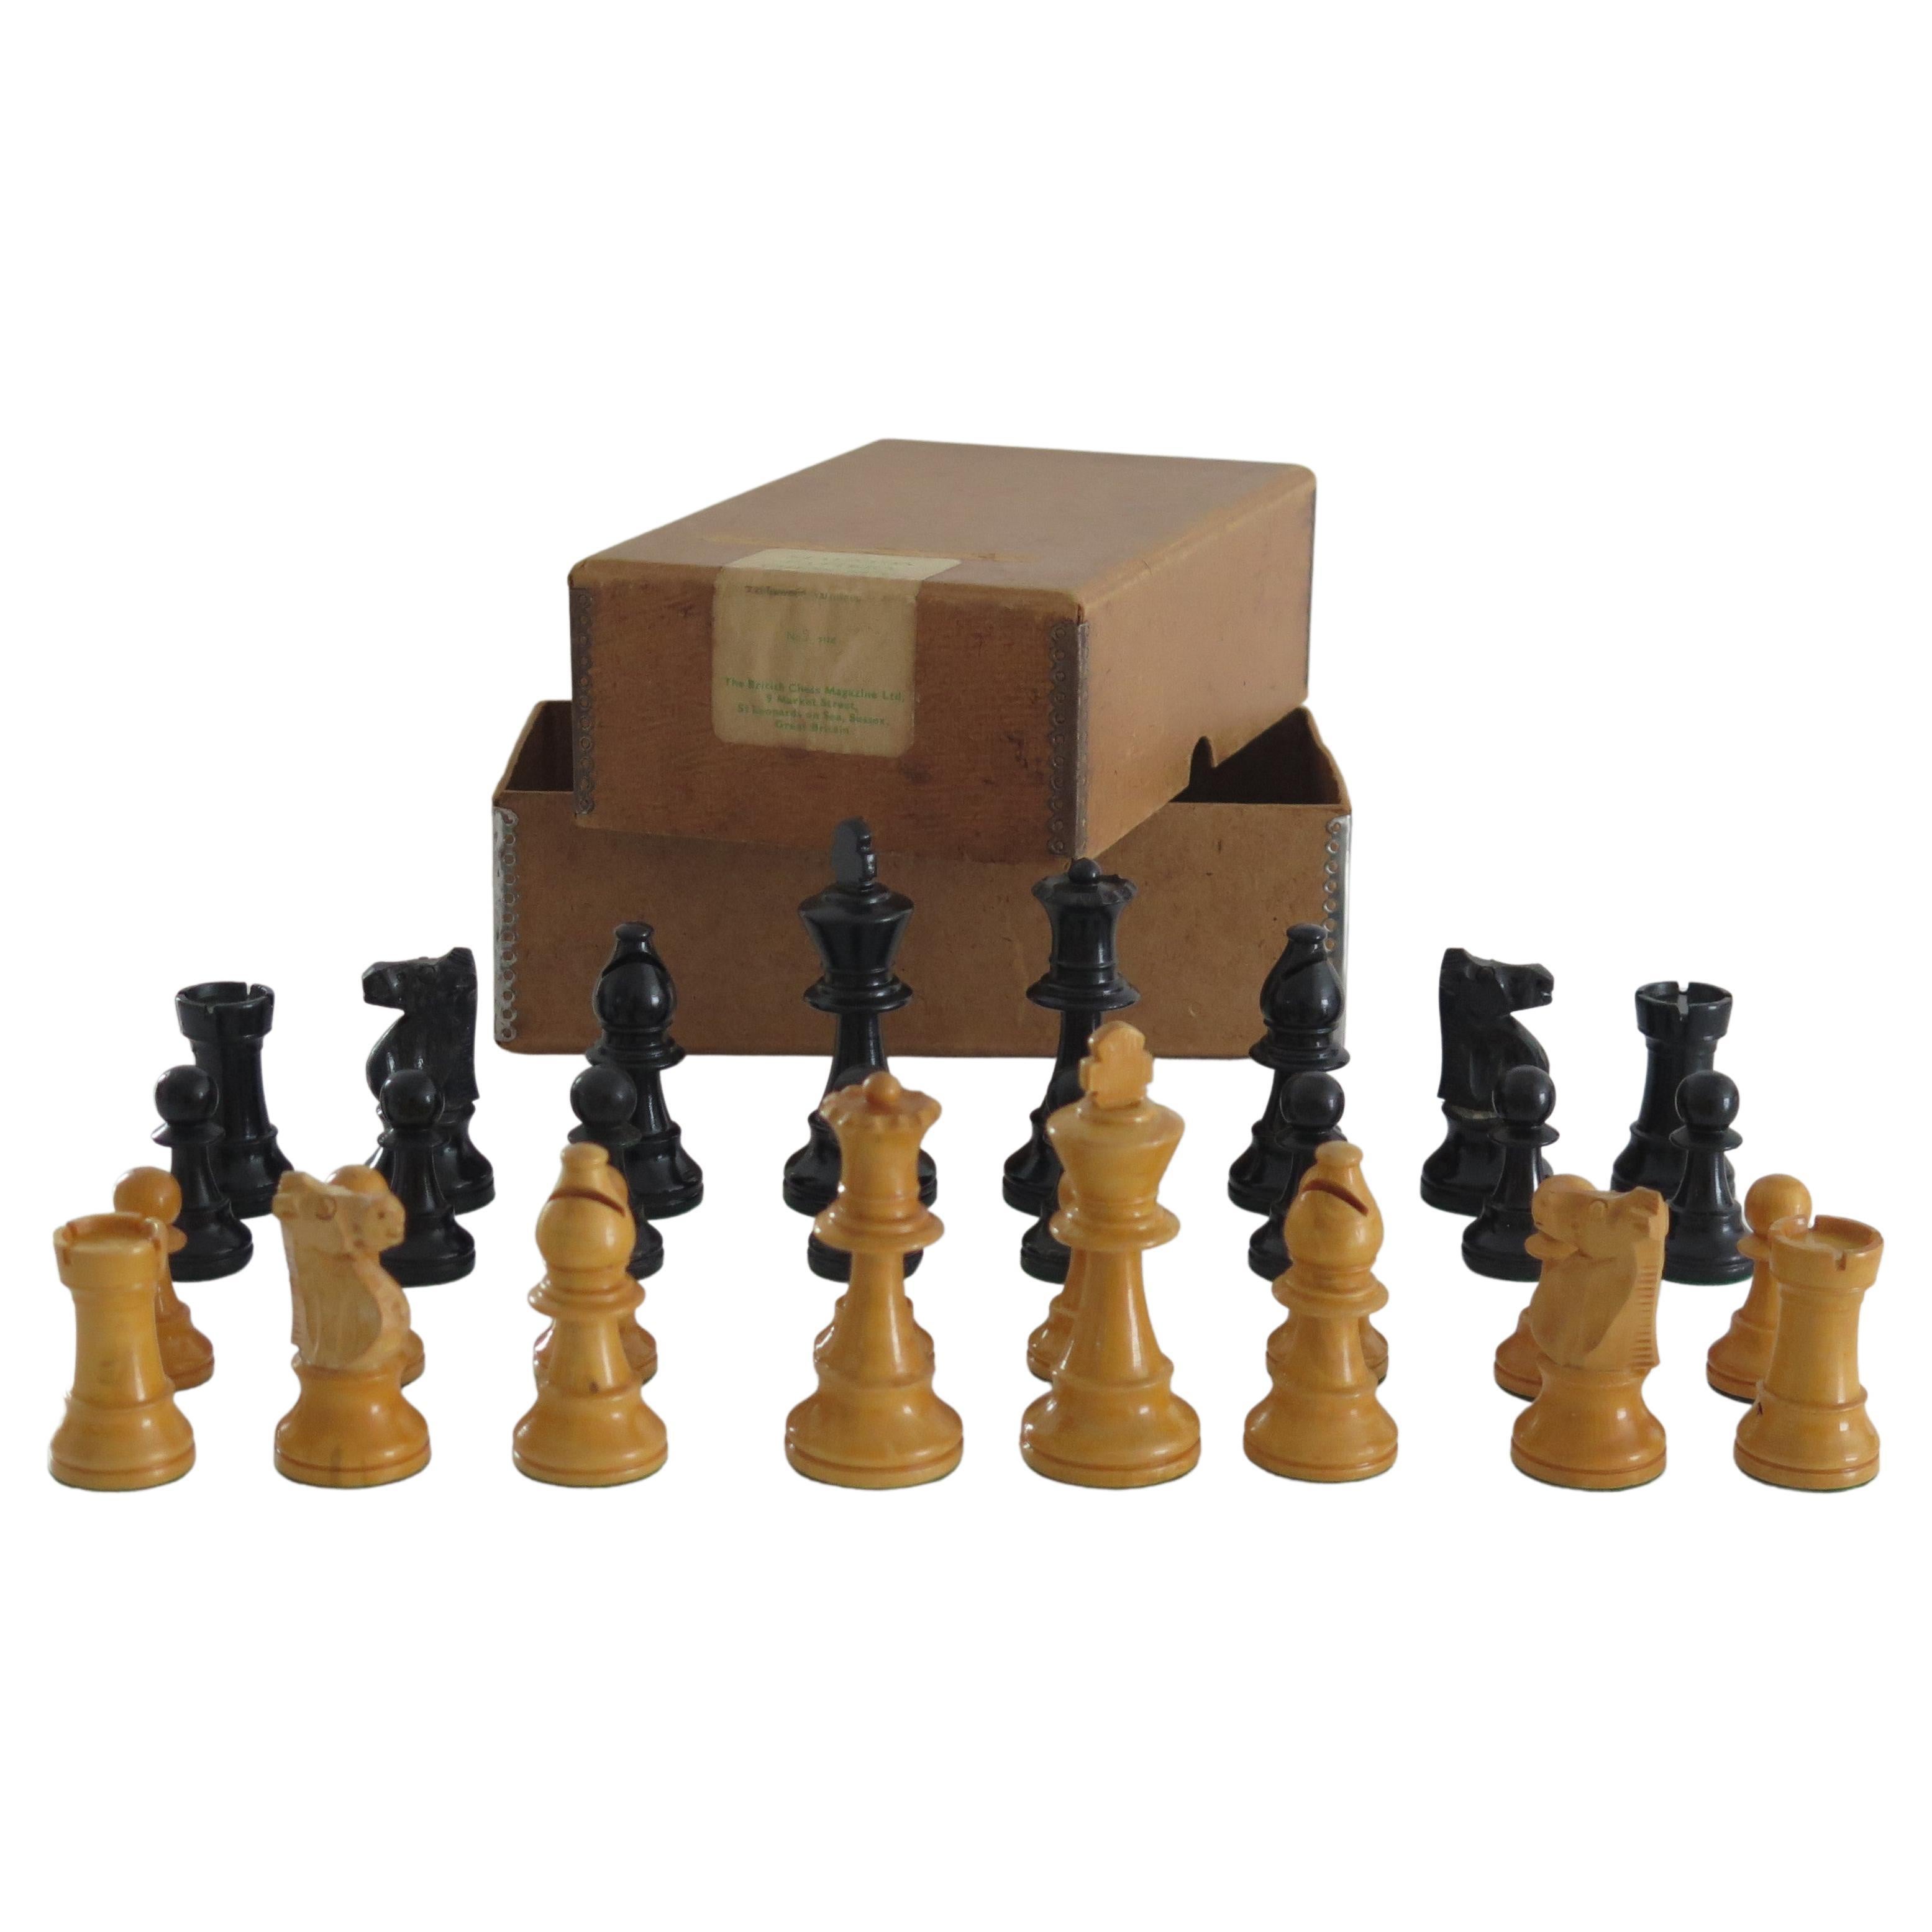 Weighted Club Chess Set Kings Staunton Pattern No. 5 Boxed, Circa 1930